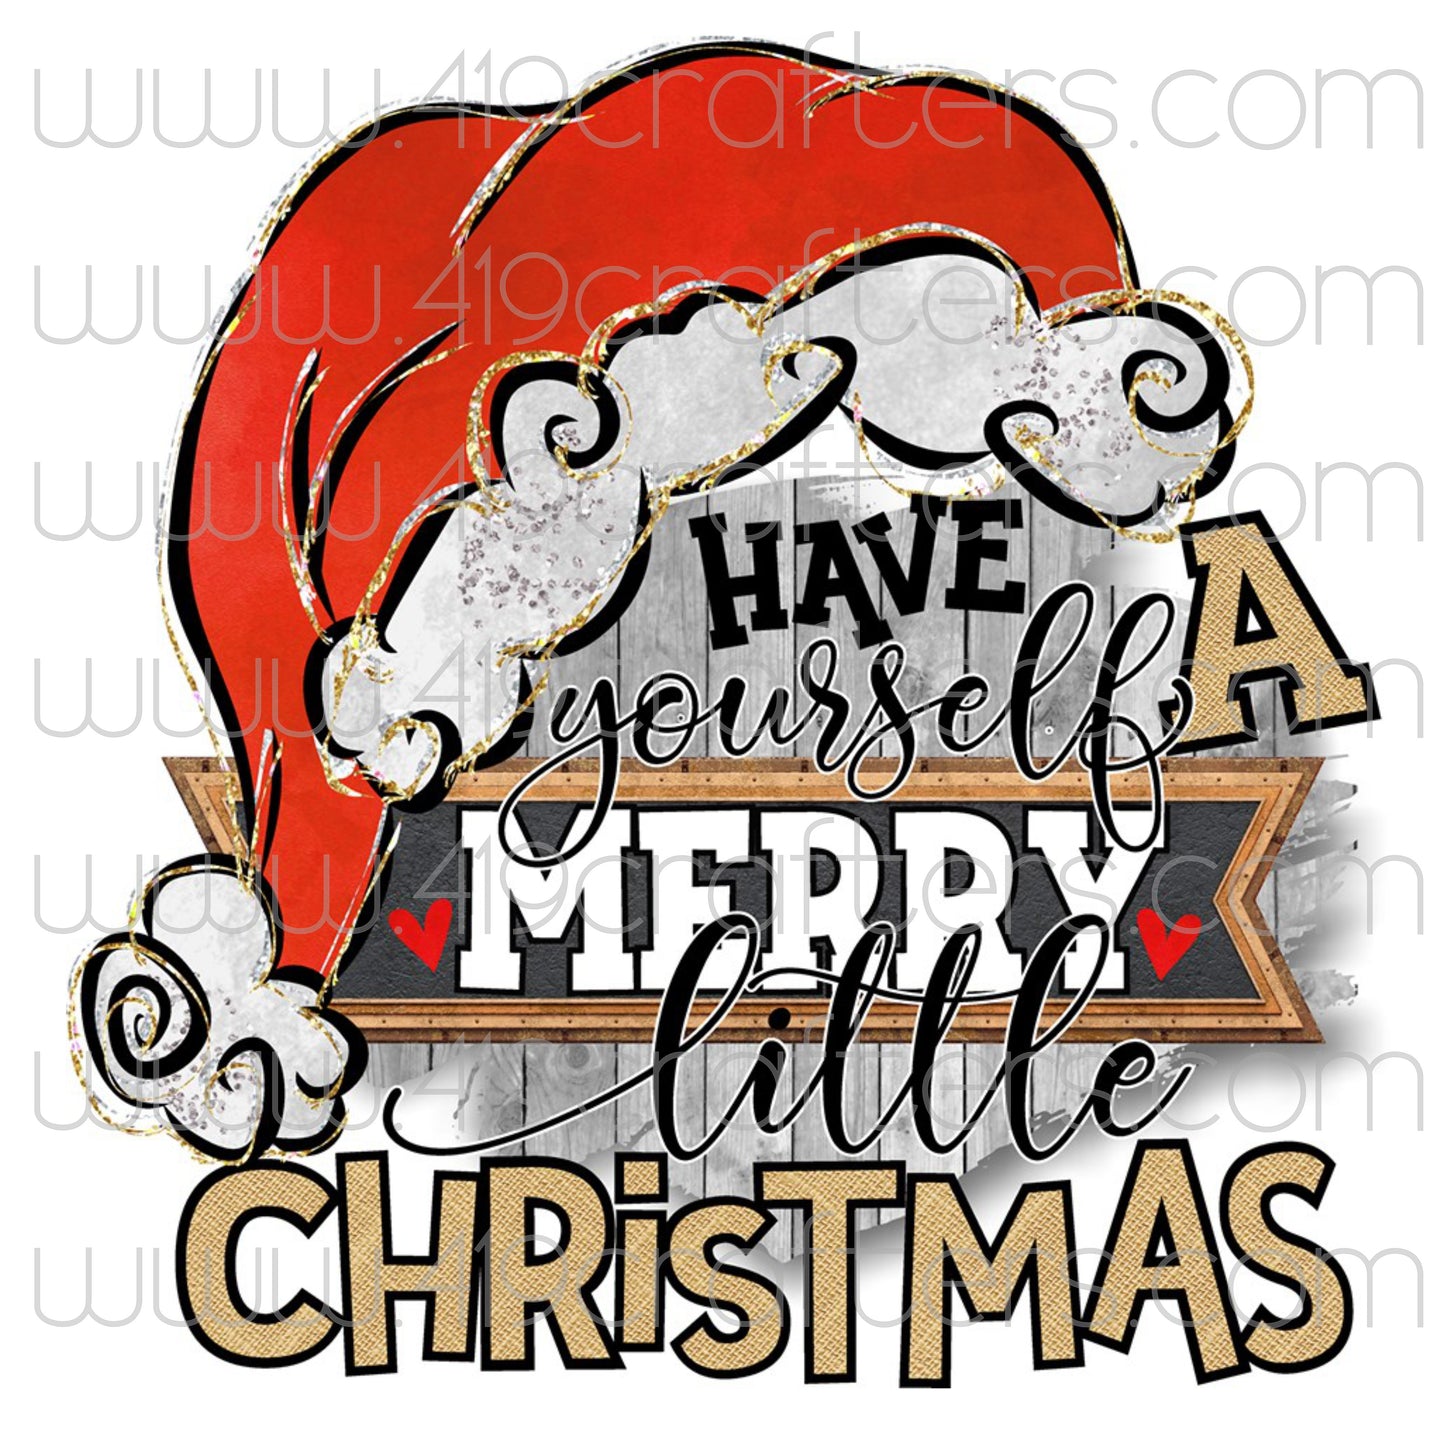 White Toner Laser Print - Have Yourself A Merry Christmas